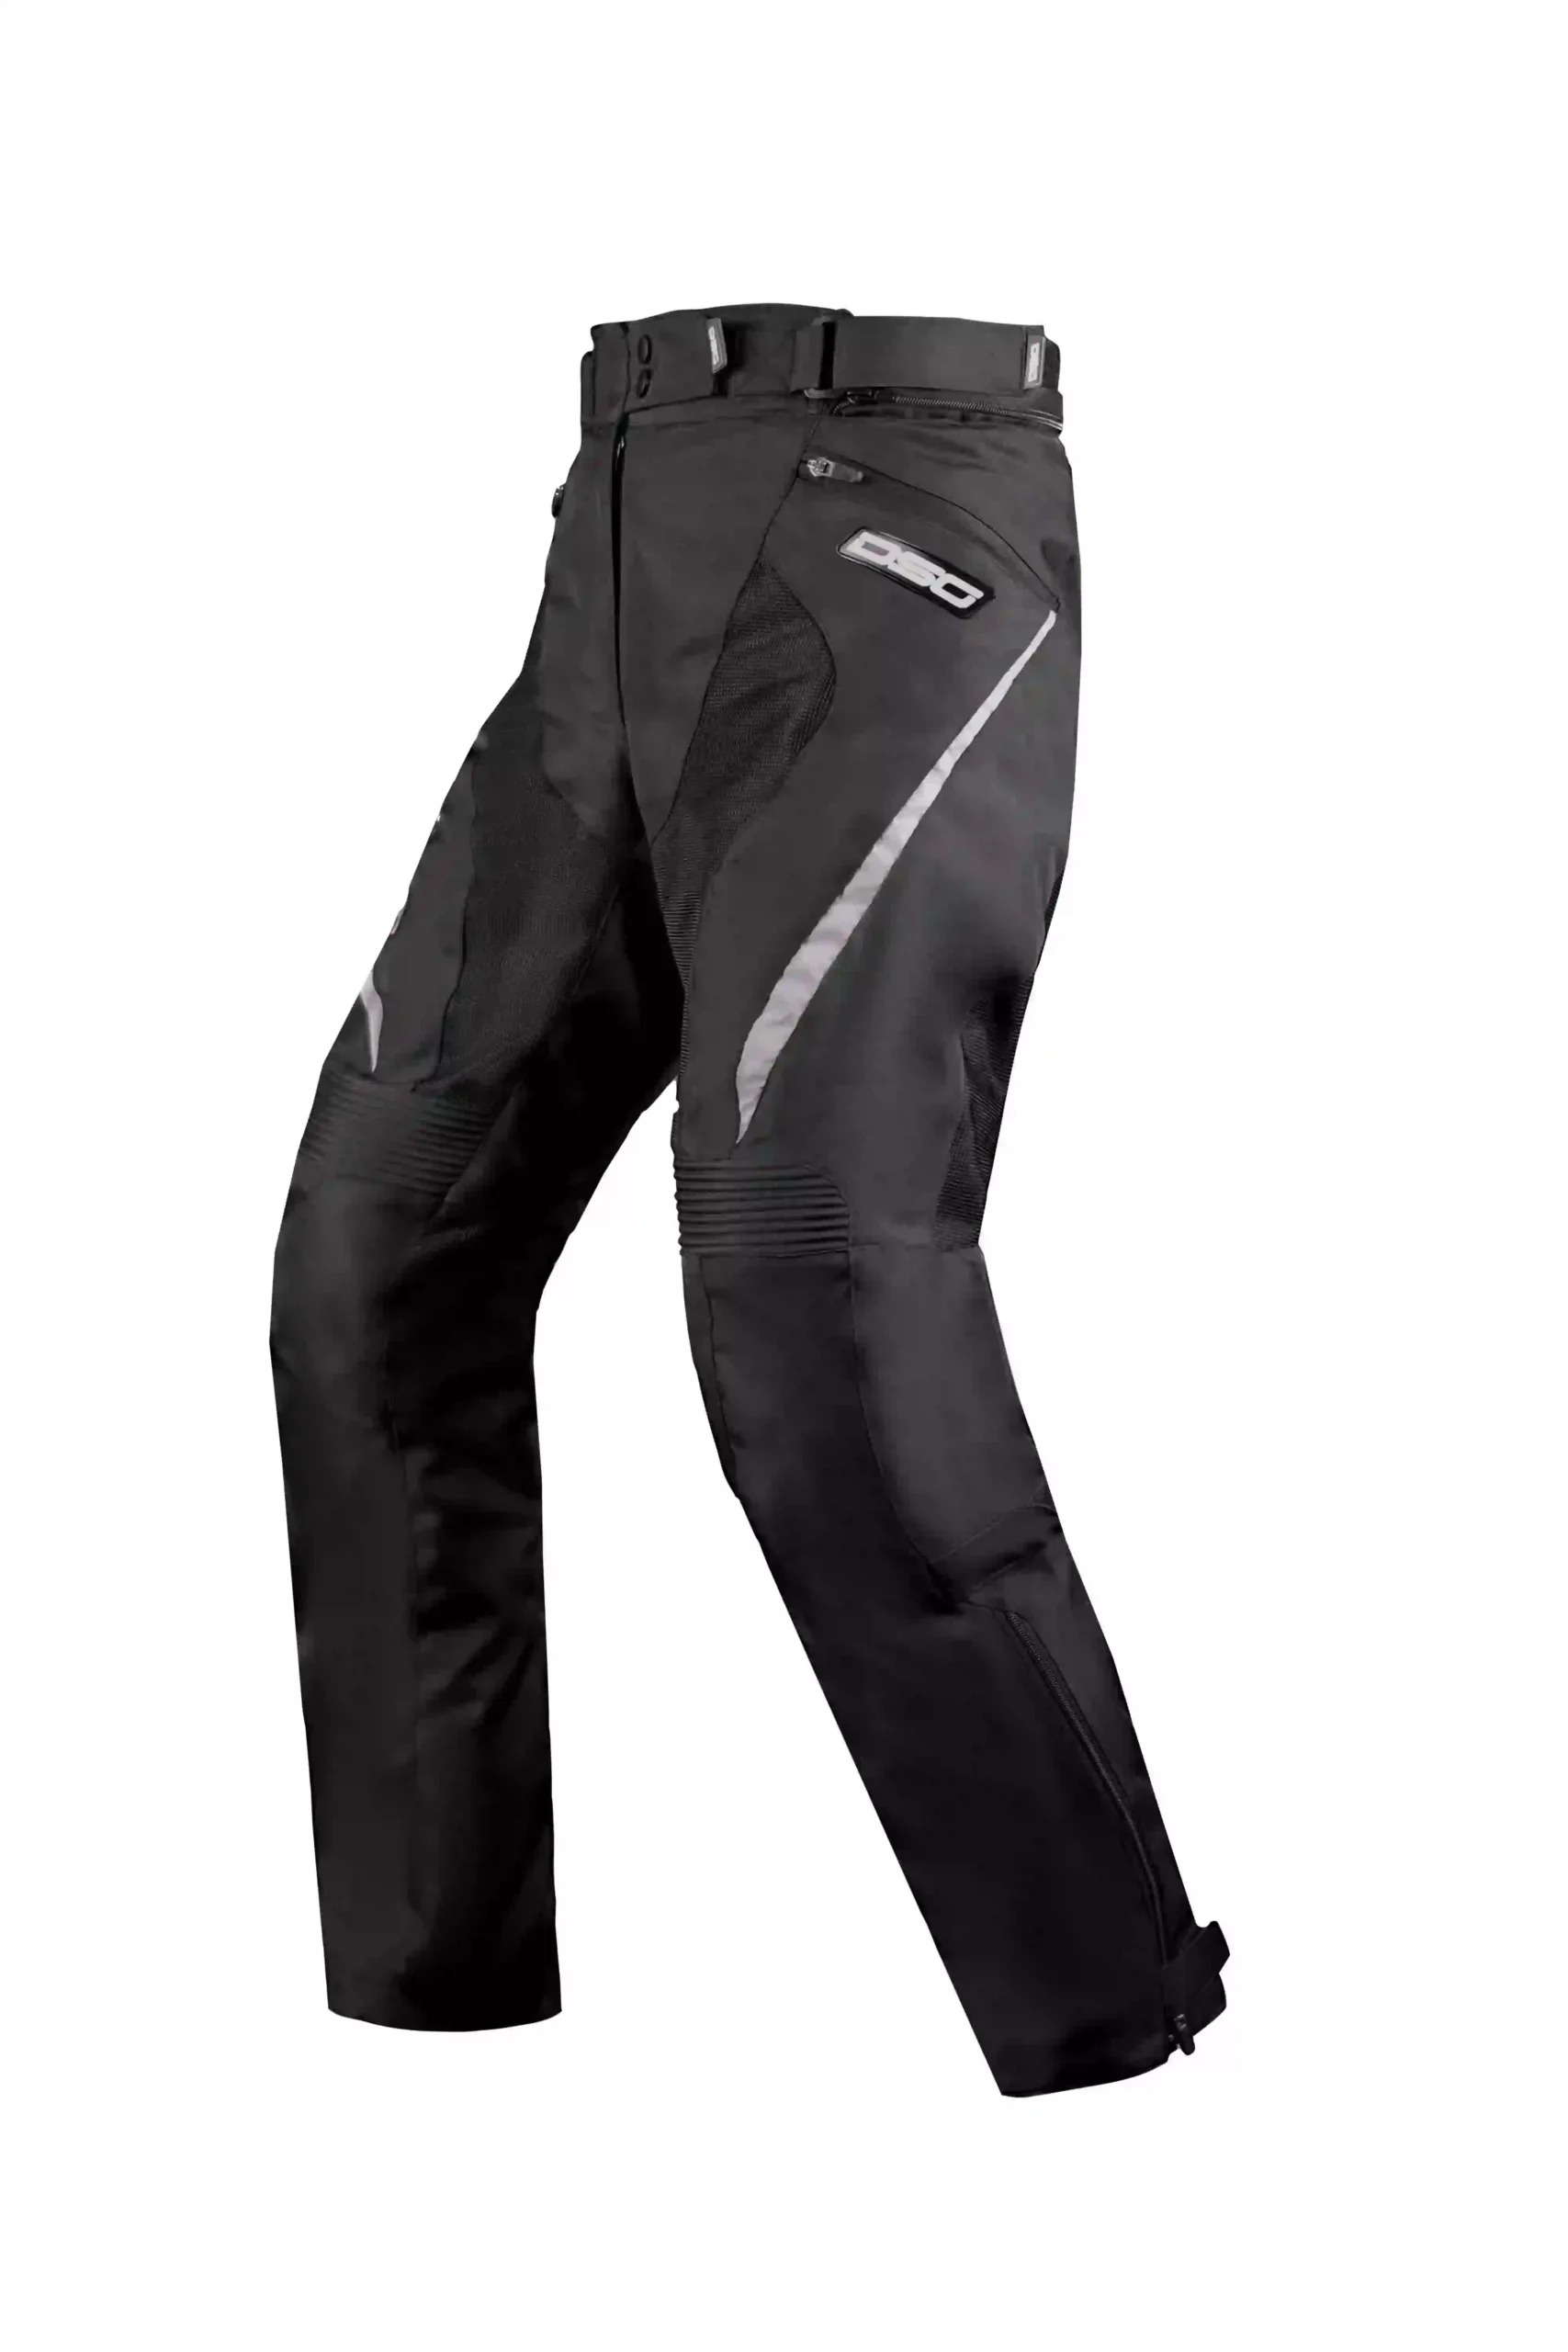 Cheapest motorcycle pants in India - Overdrive